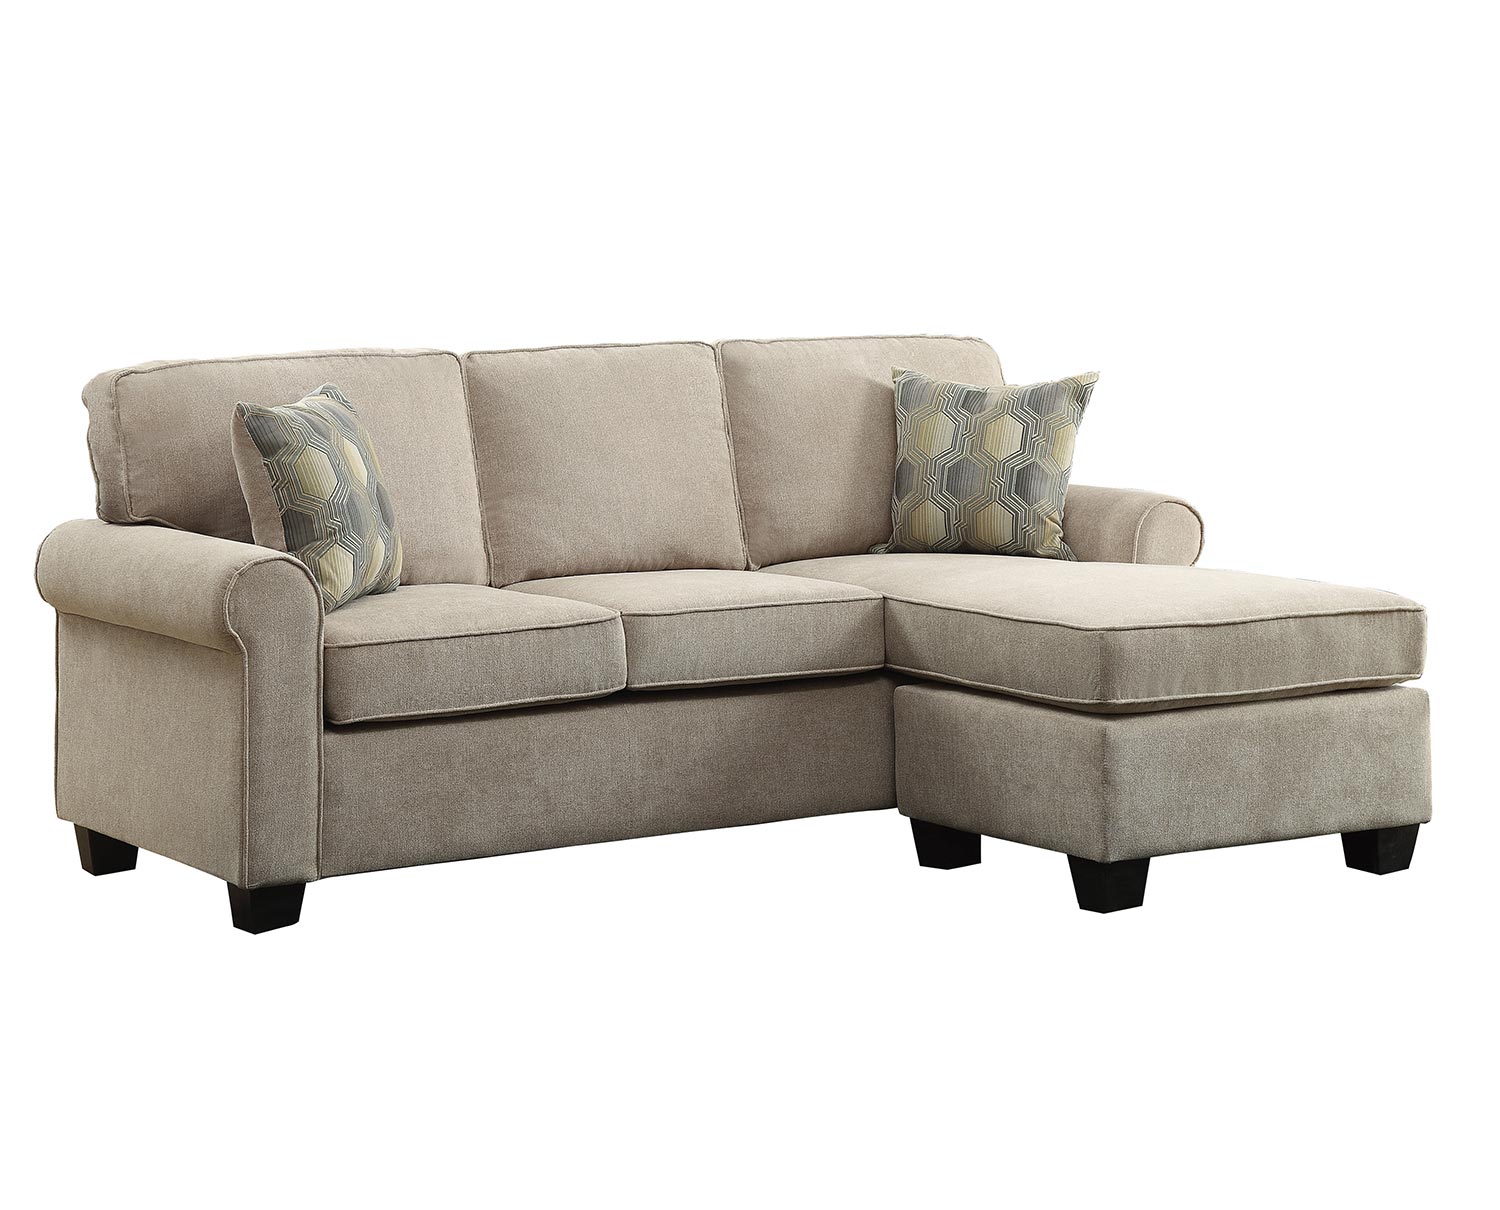 Homelegance Clumber Reversible Sofa Chaise Sectional - Sand